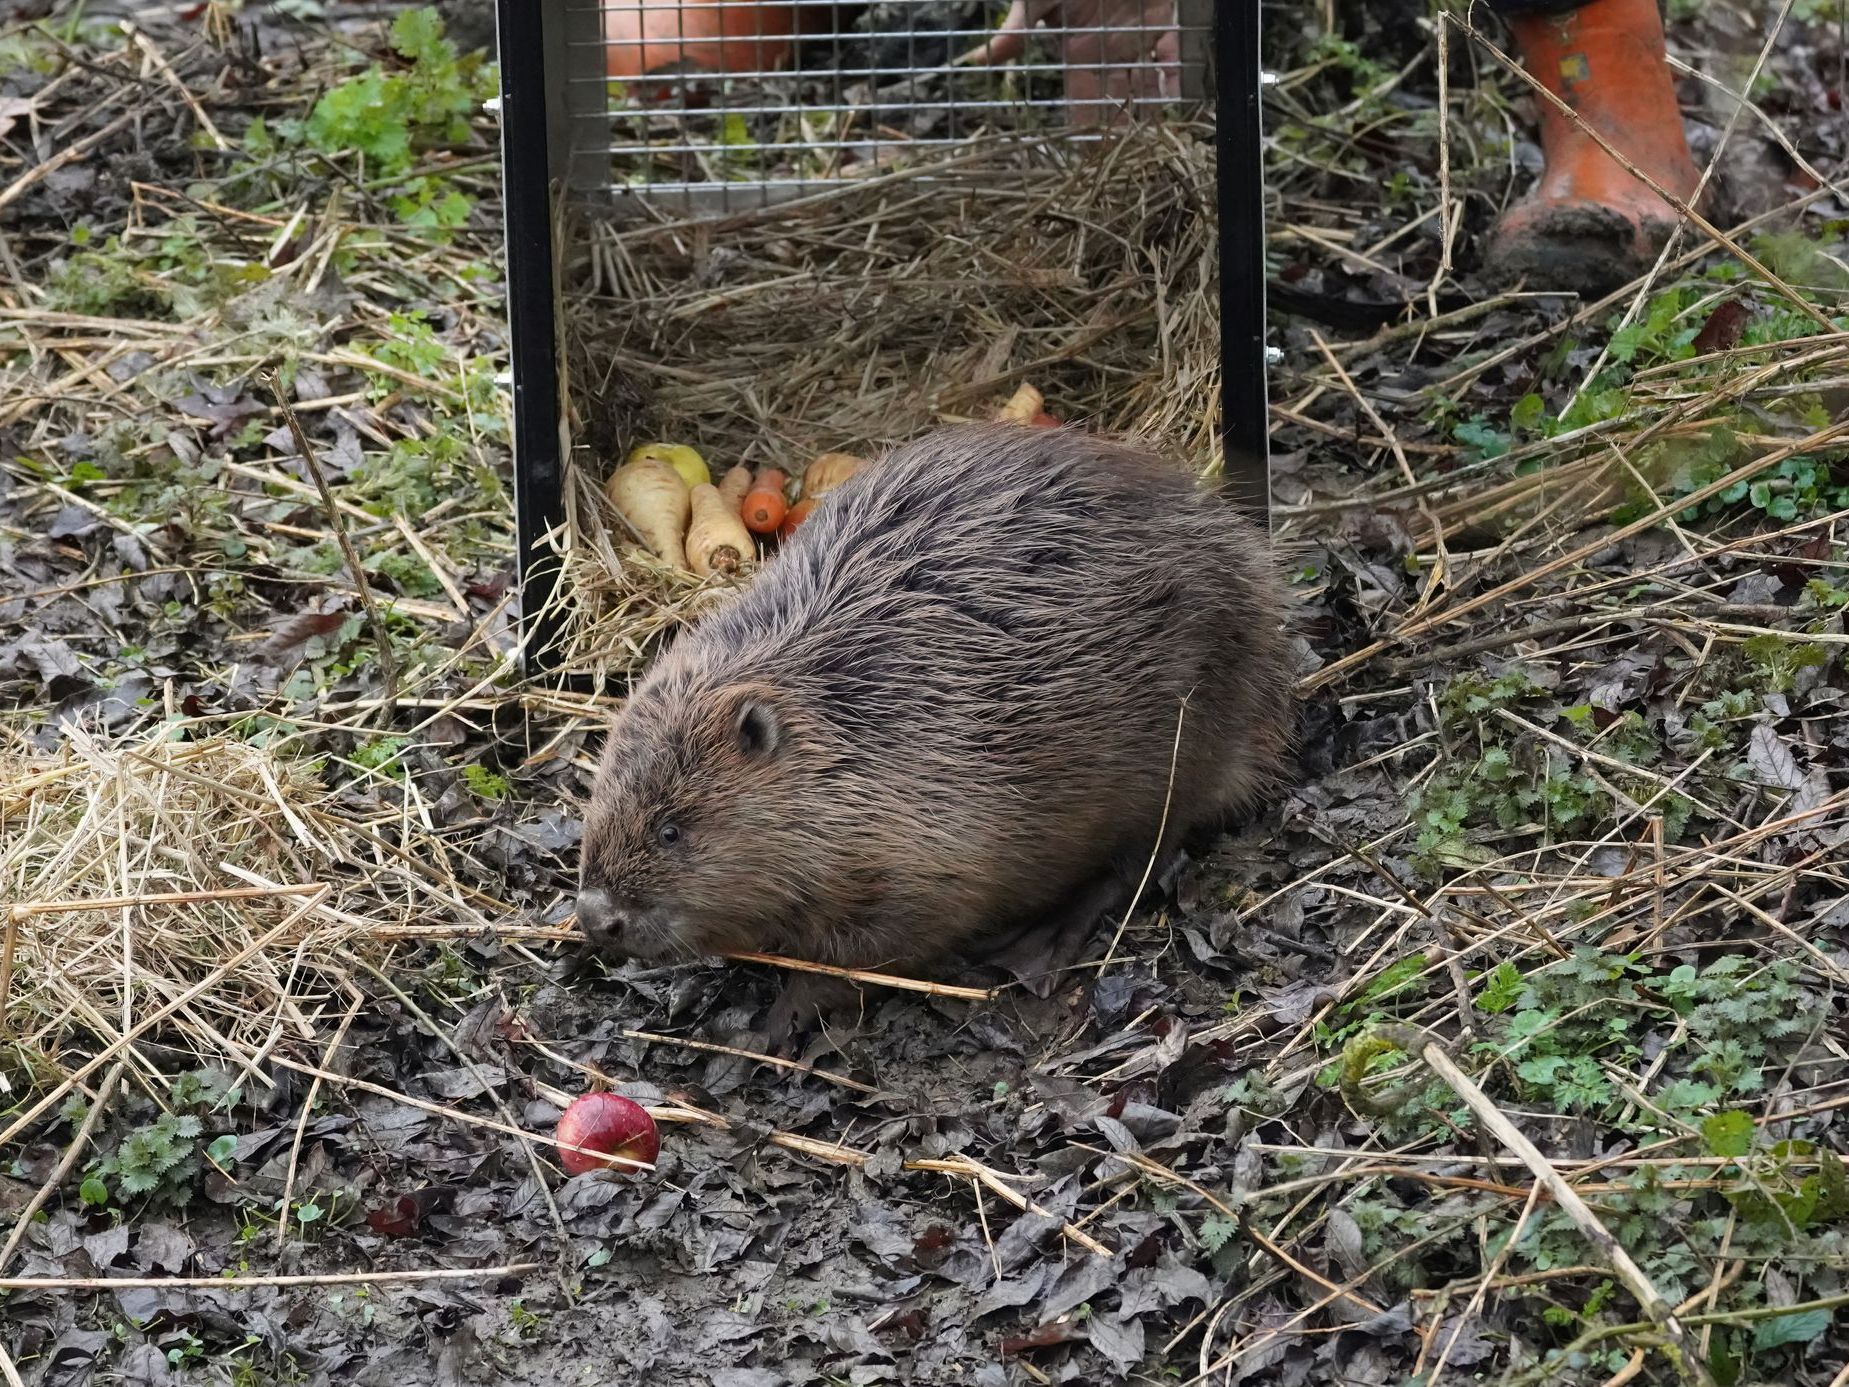 Female beaver being released at Spains Hall Estate (c) Simon Hurwitz